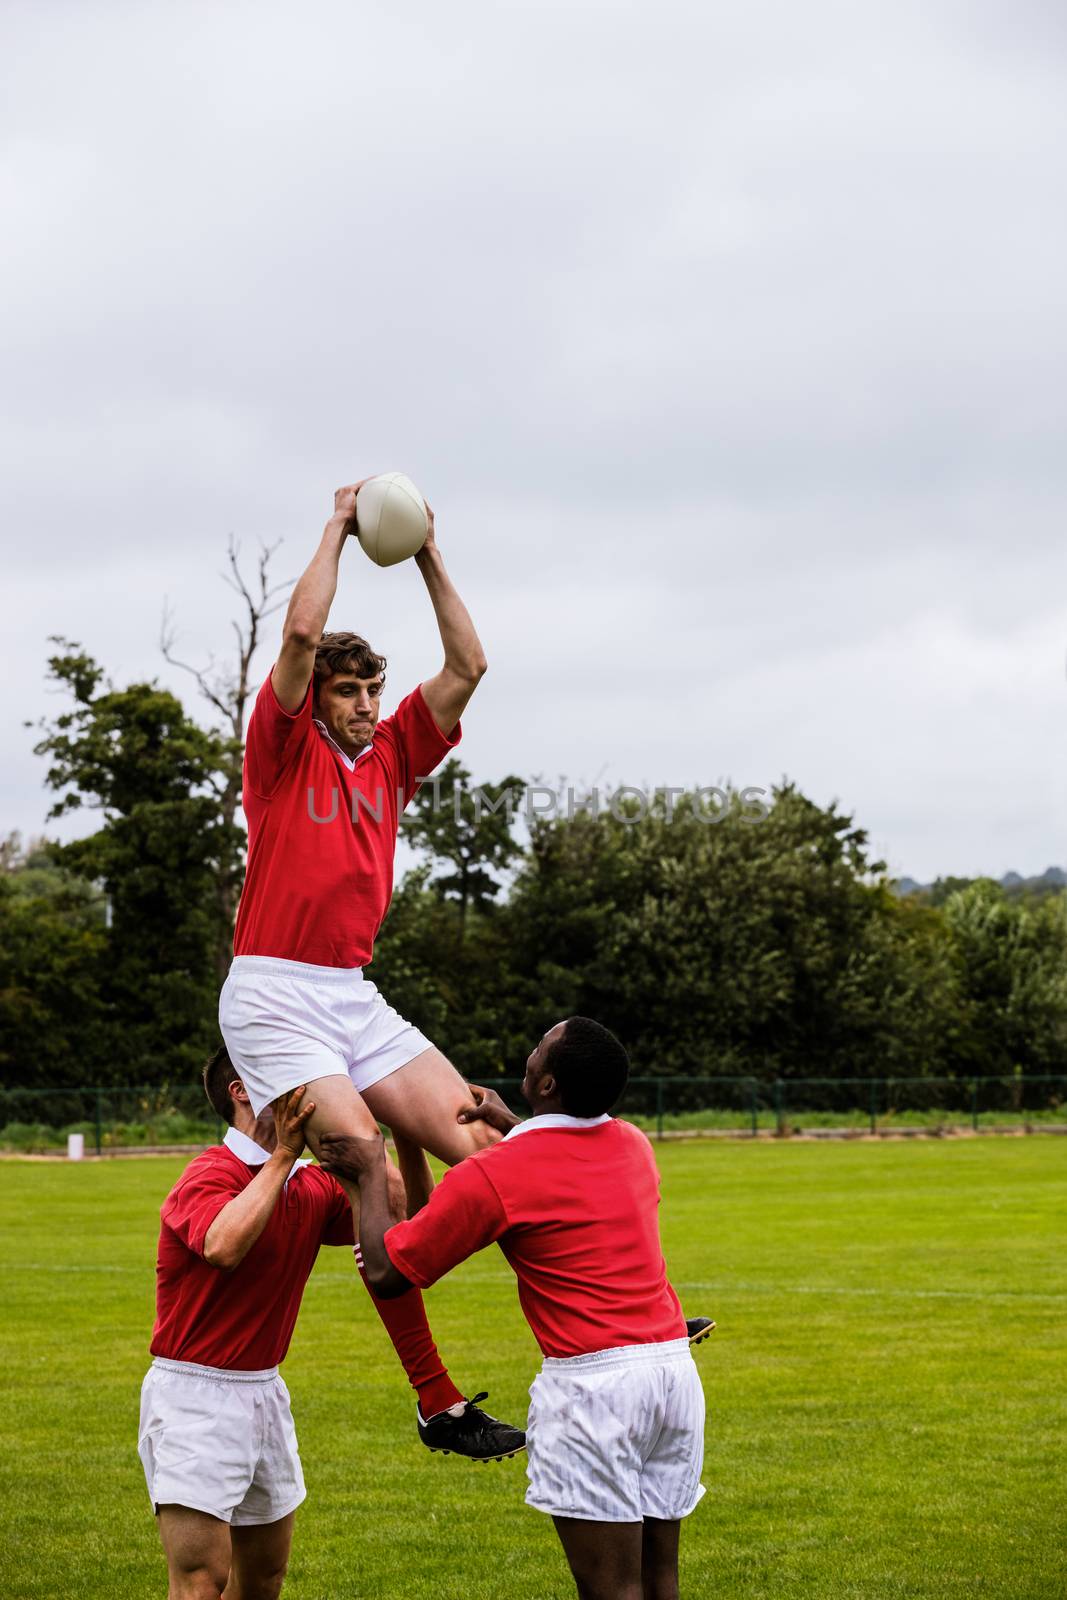 Rugby players jumping for line out by Wavebreakmedia